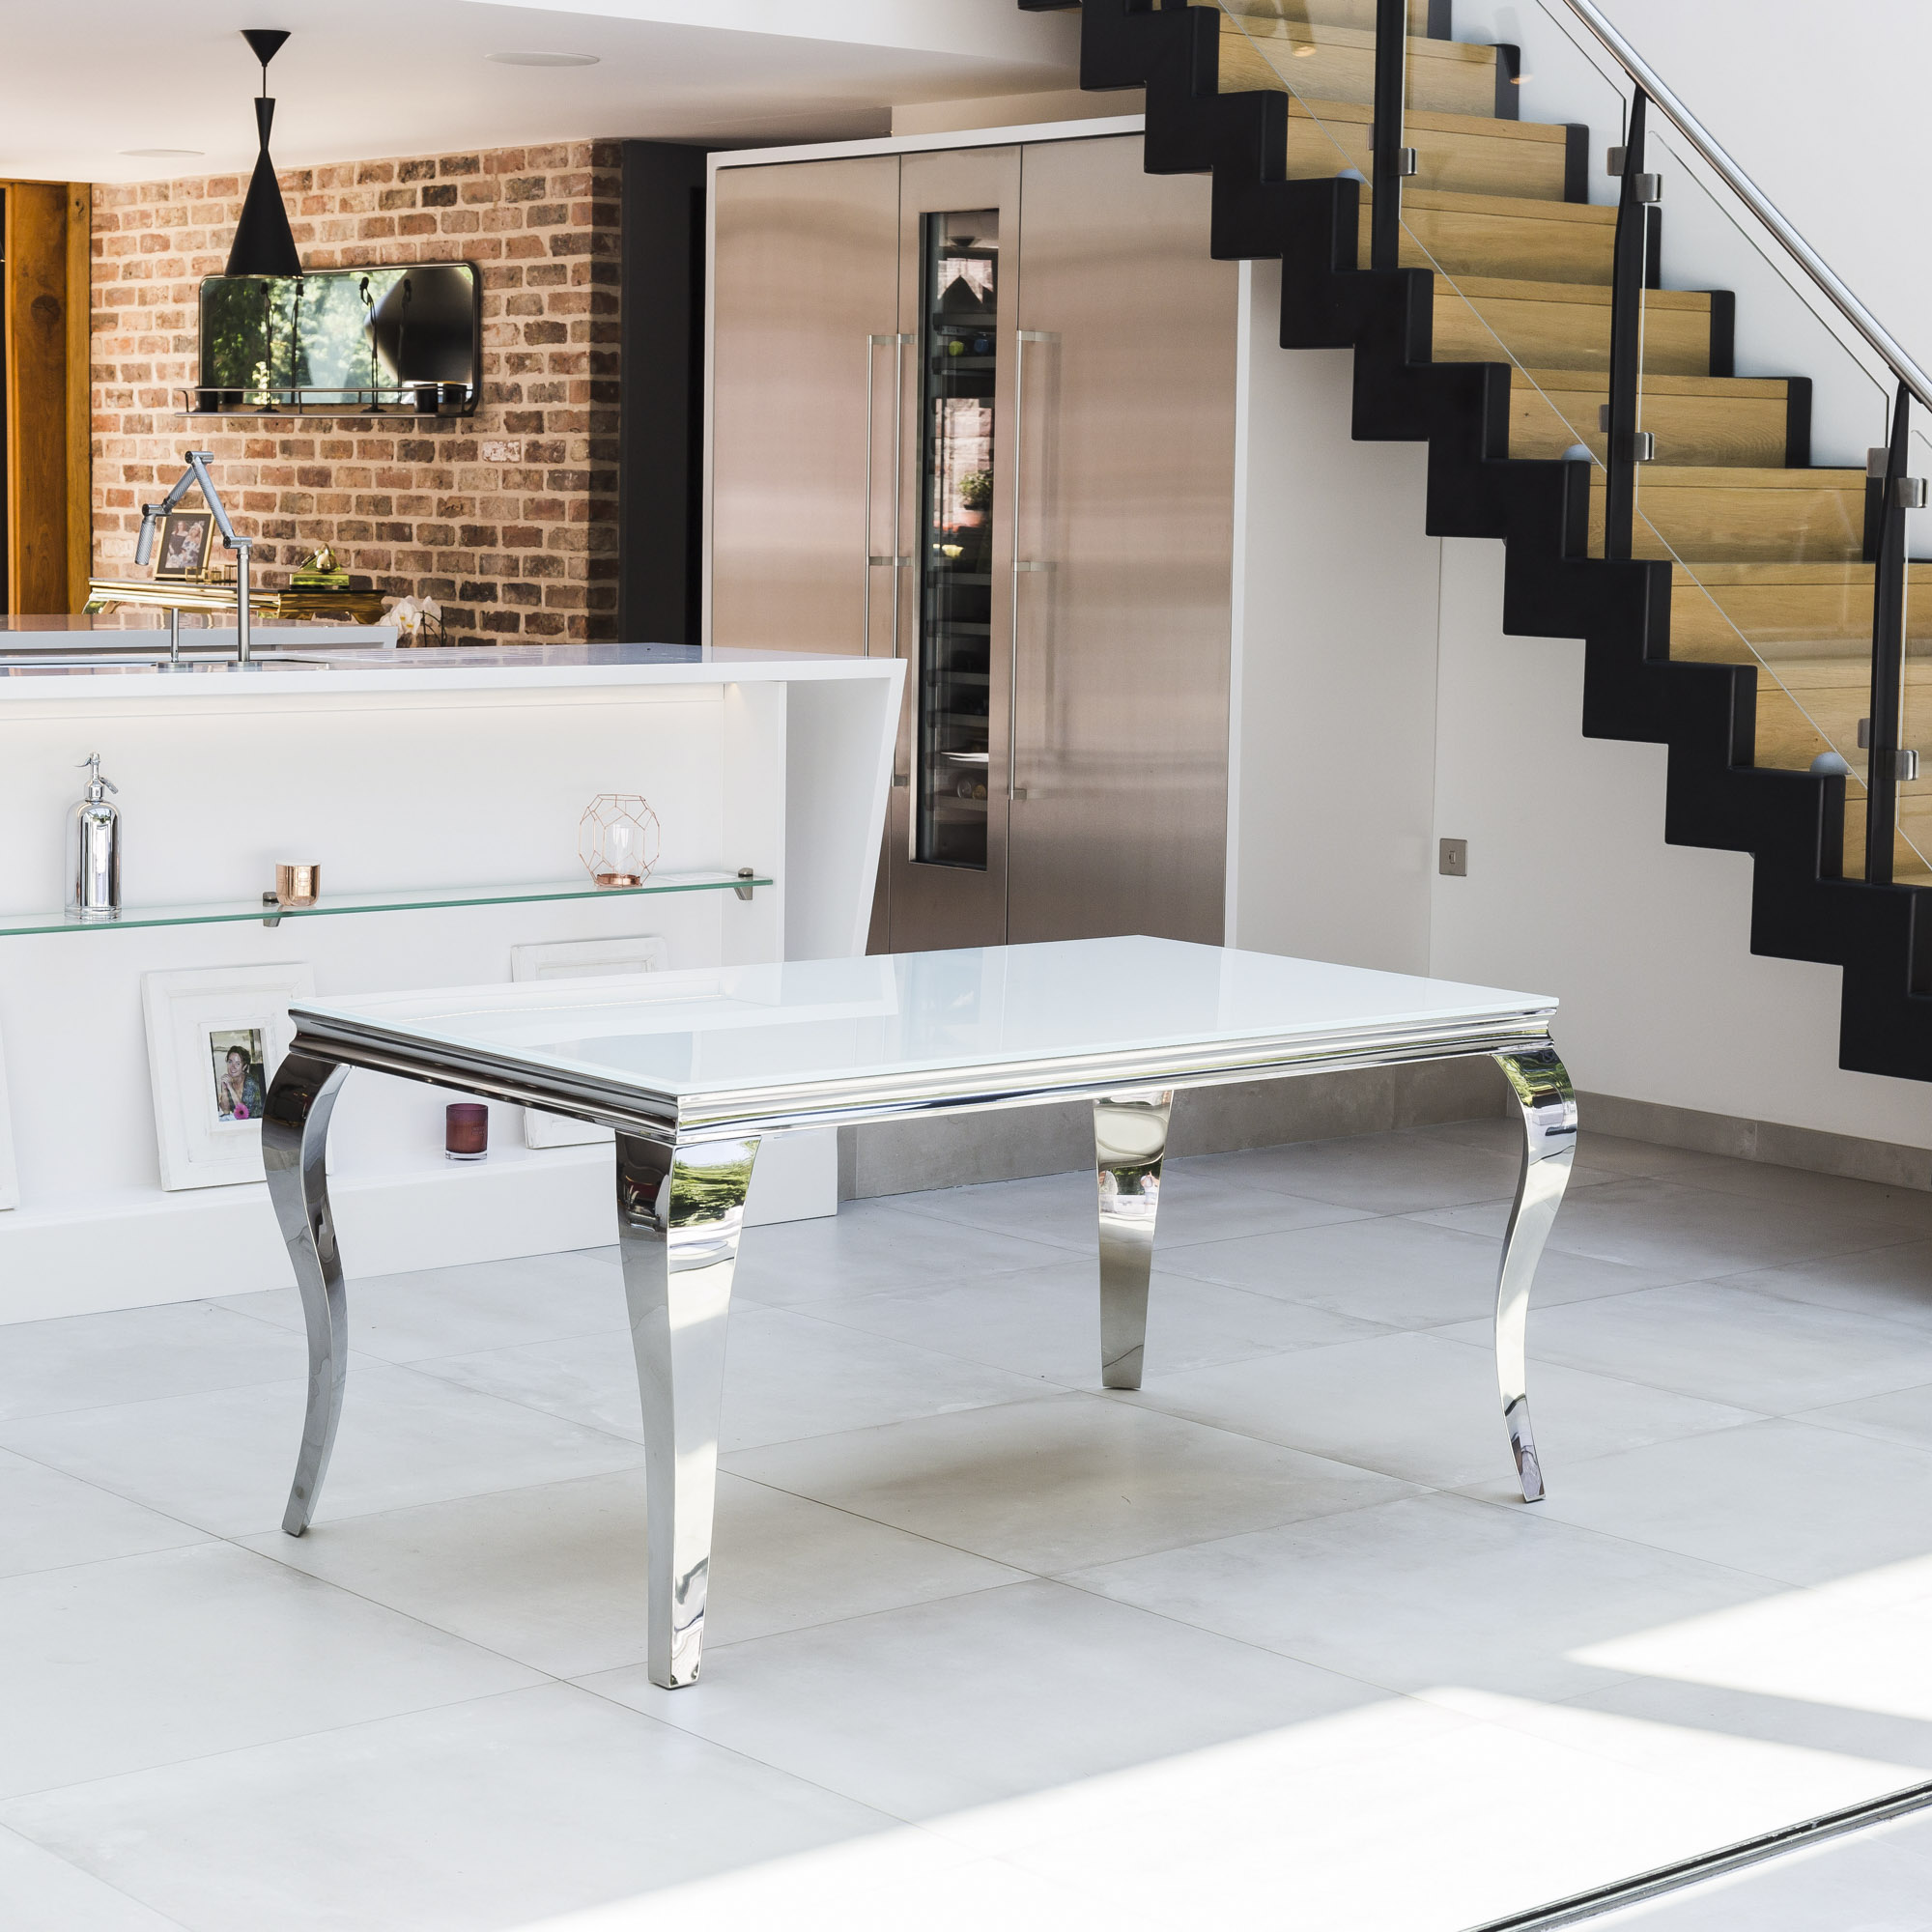 1.6m Louis Polished Stainless Steel & White Glass Dining Table